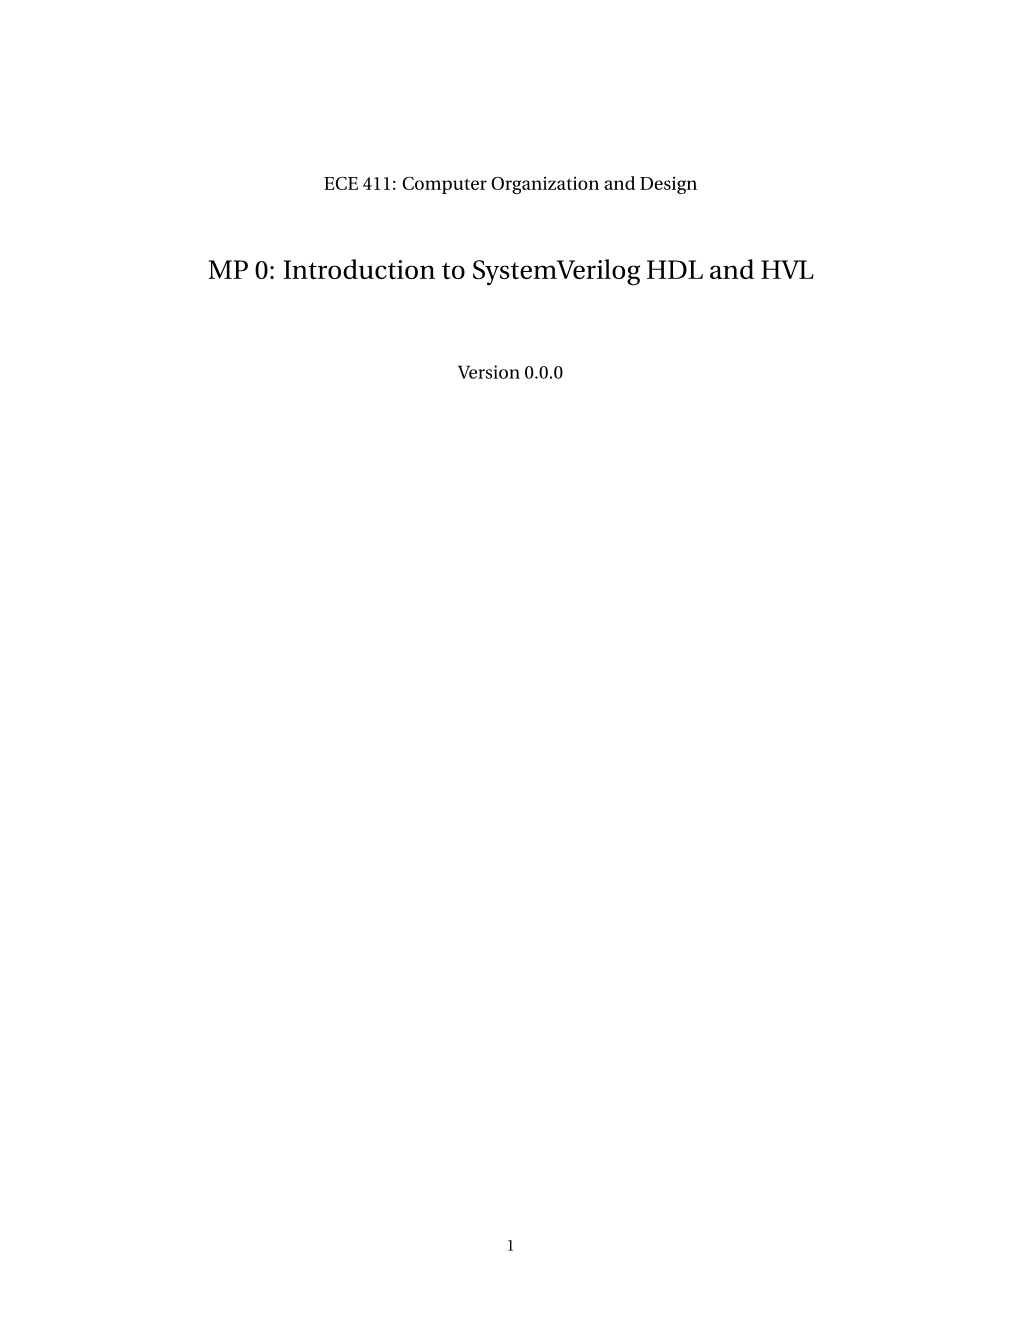 MP 0: Introduction to Systemverilog HDL and HVL